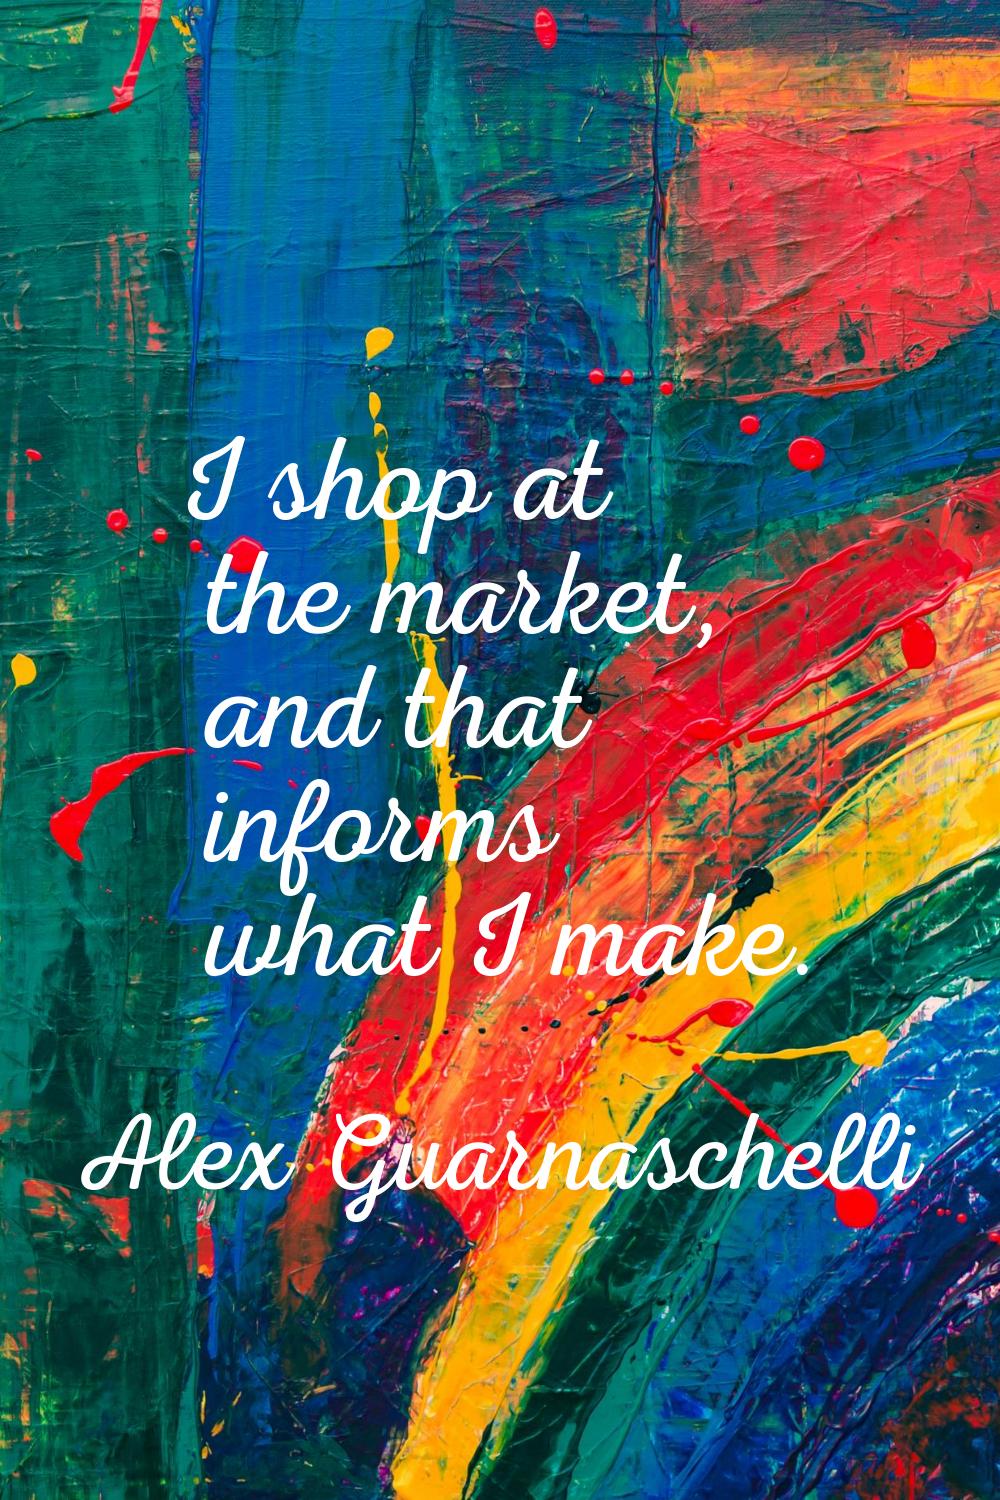 I shop at the market, and that informs what I make.